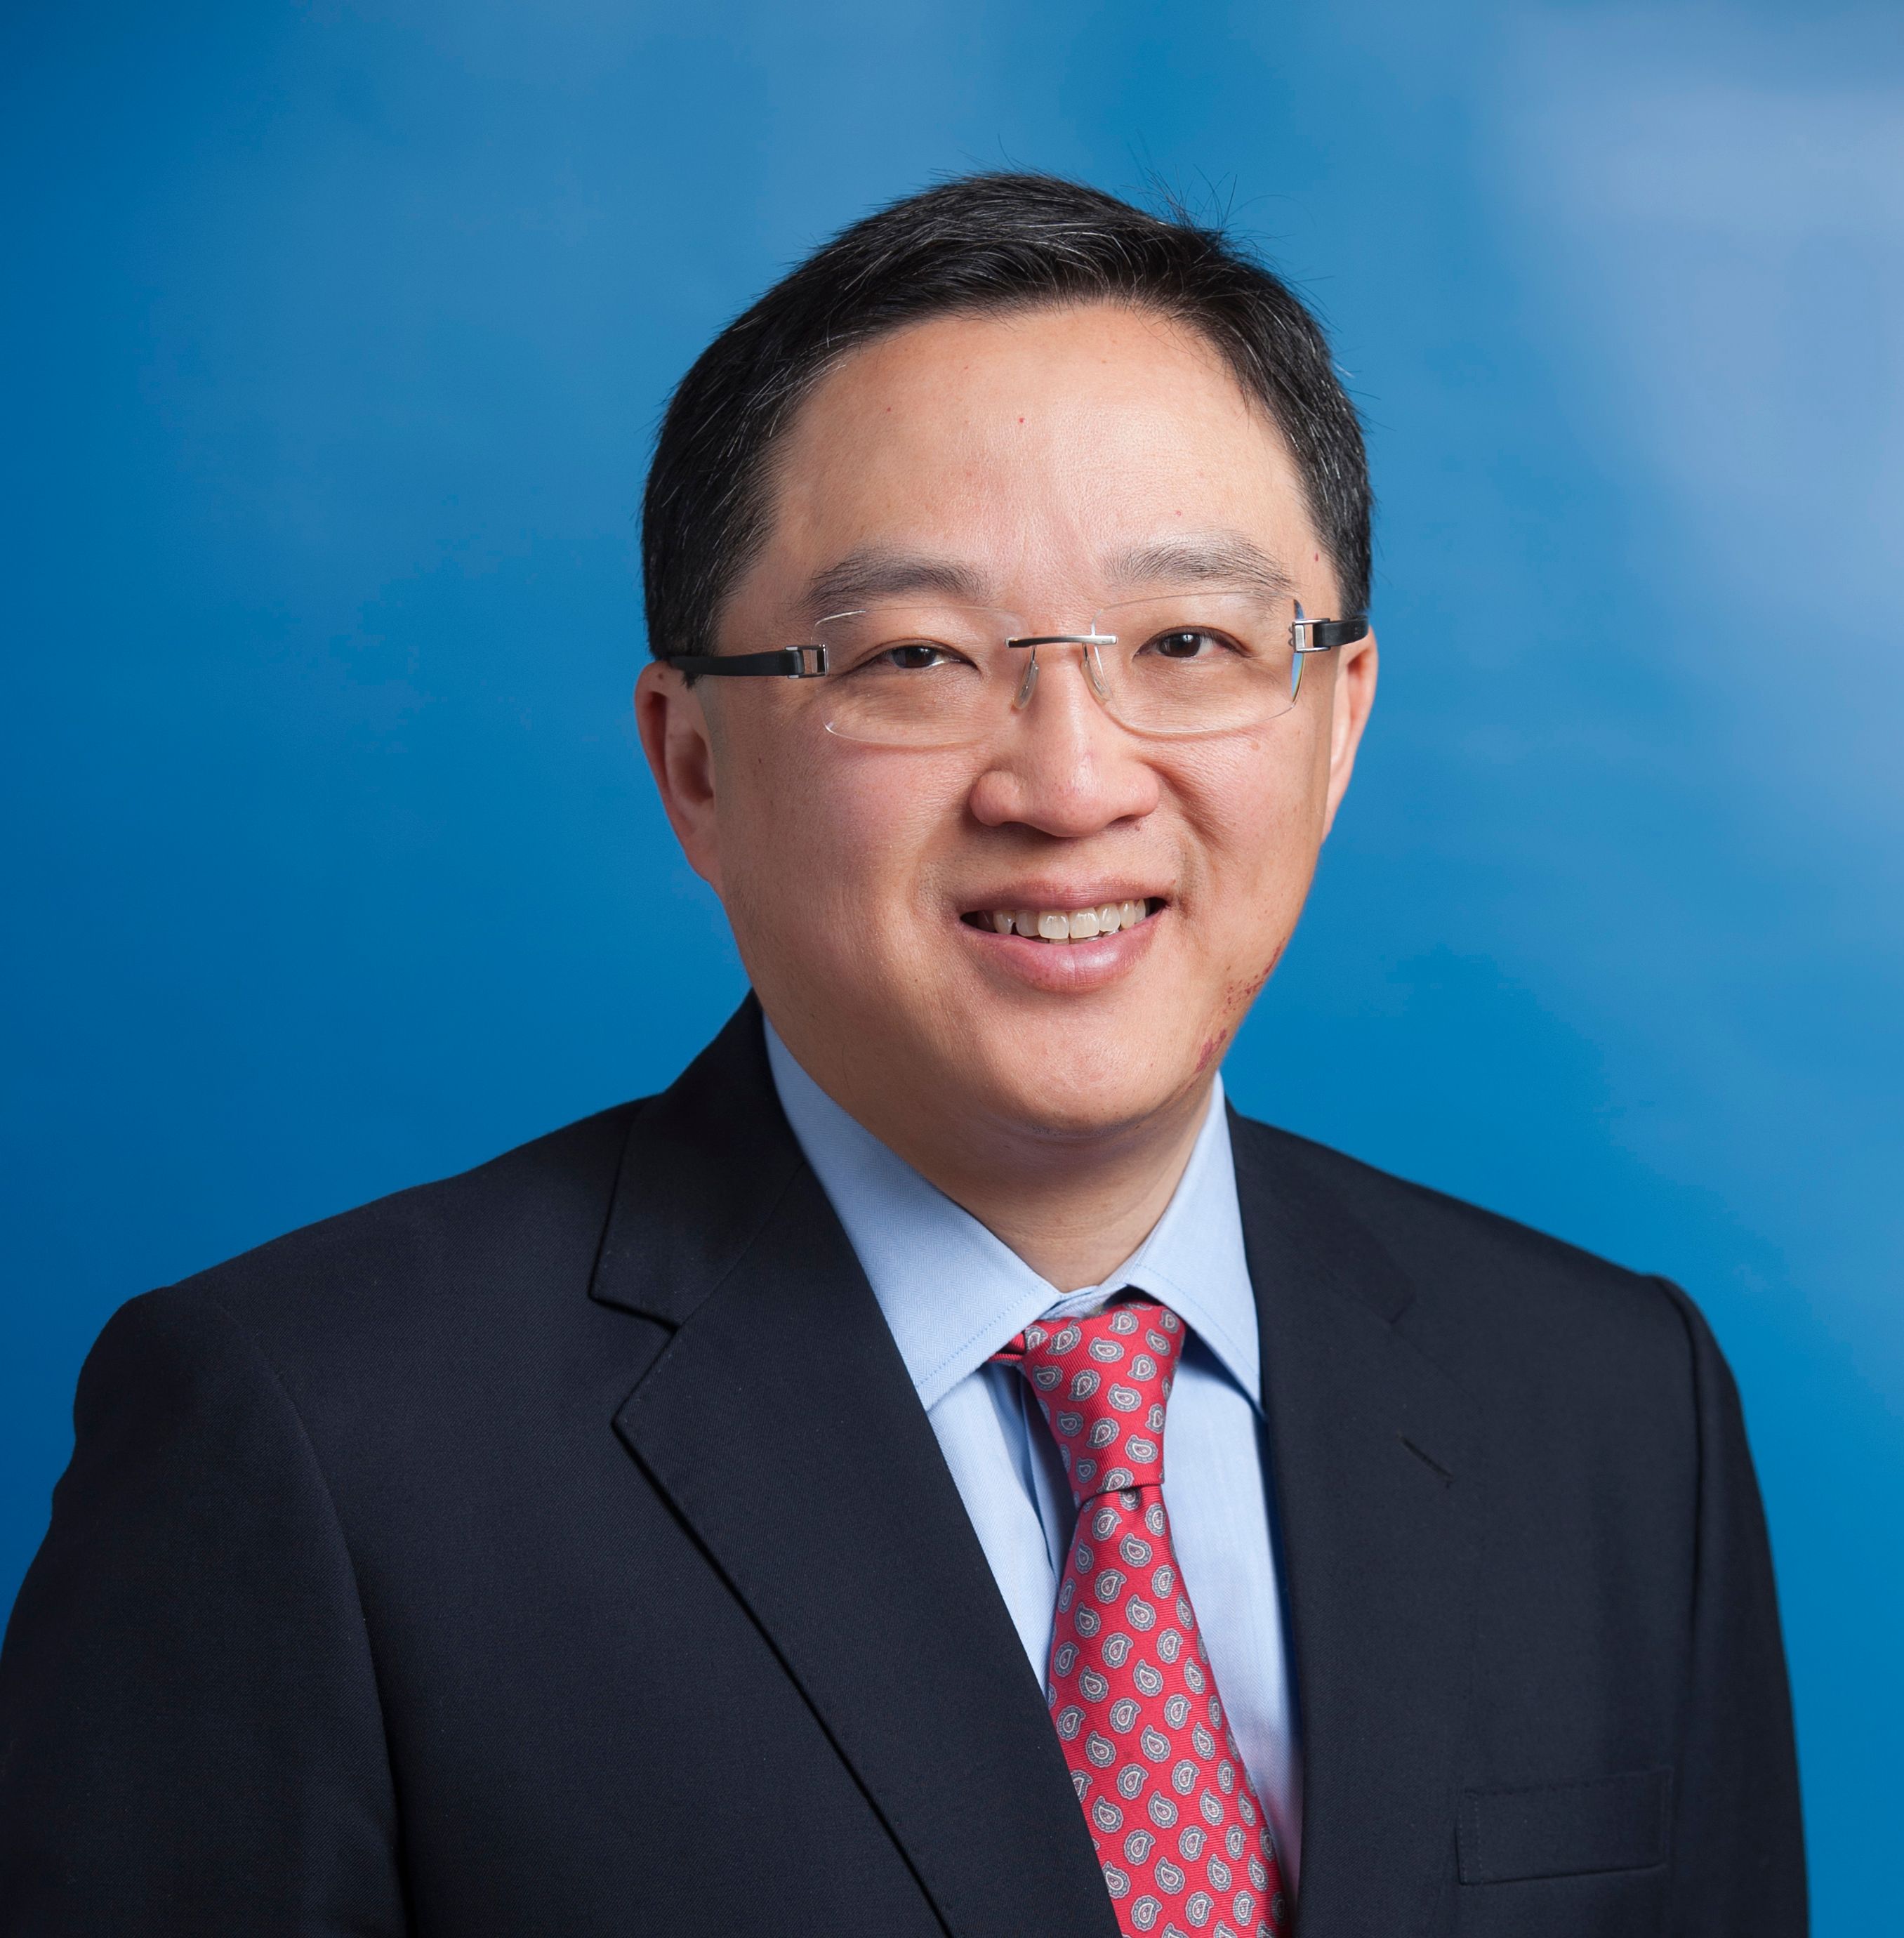 Honson To, Chairman of KPMG’s Asia Pacific region and Chairman of KPMG China